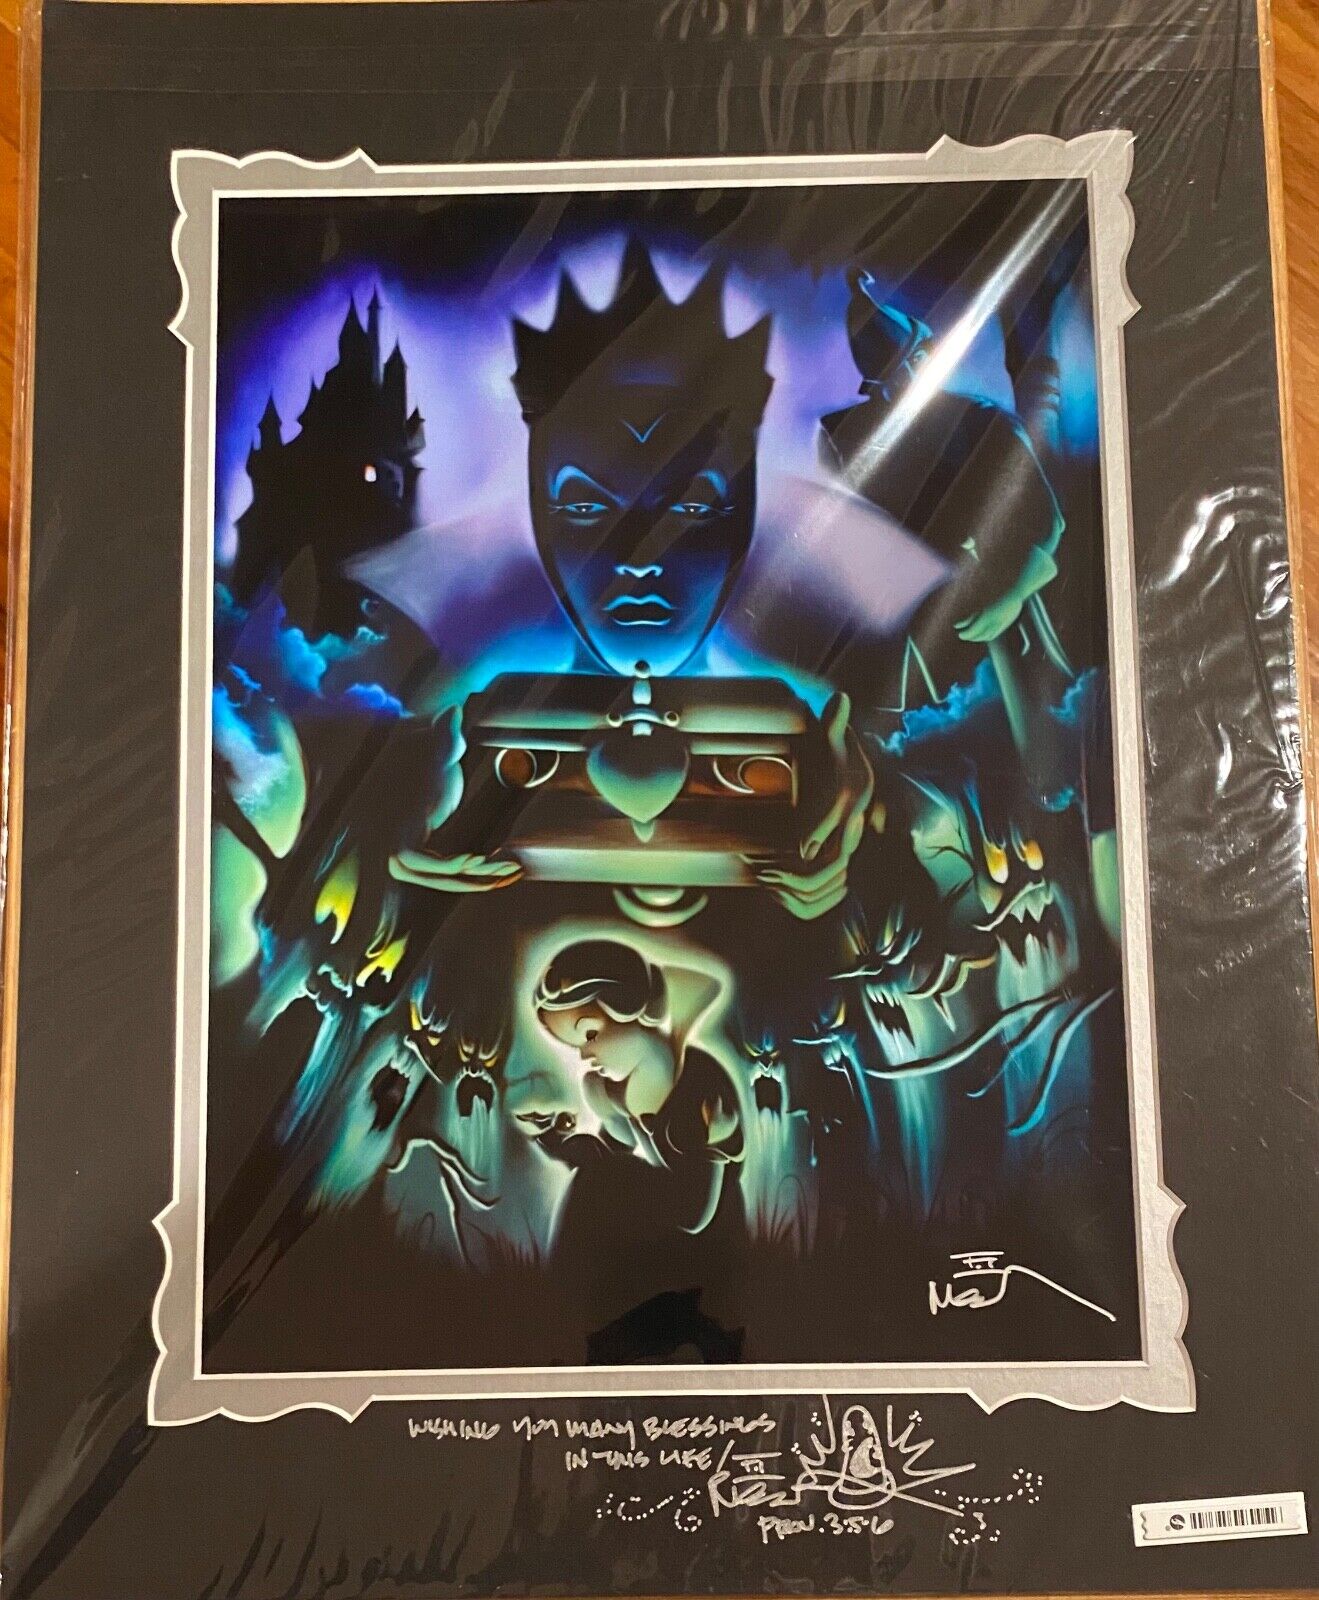 RARE NEW DISNEY MATTED ART PRINT EVIL QUEEN SNOW WHITE SIGNED INSCRIBED BY NOAH